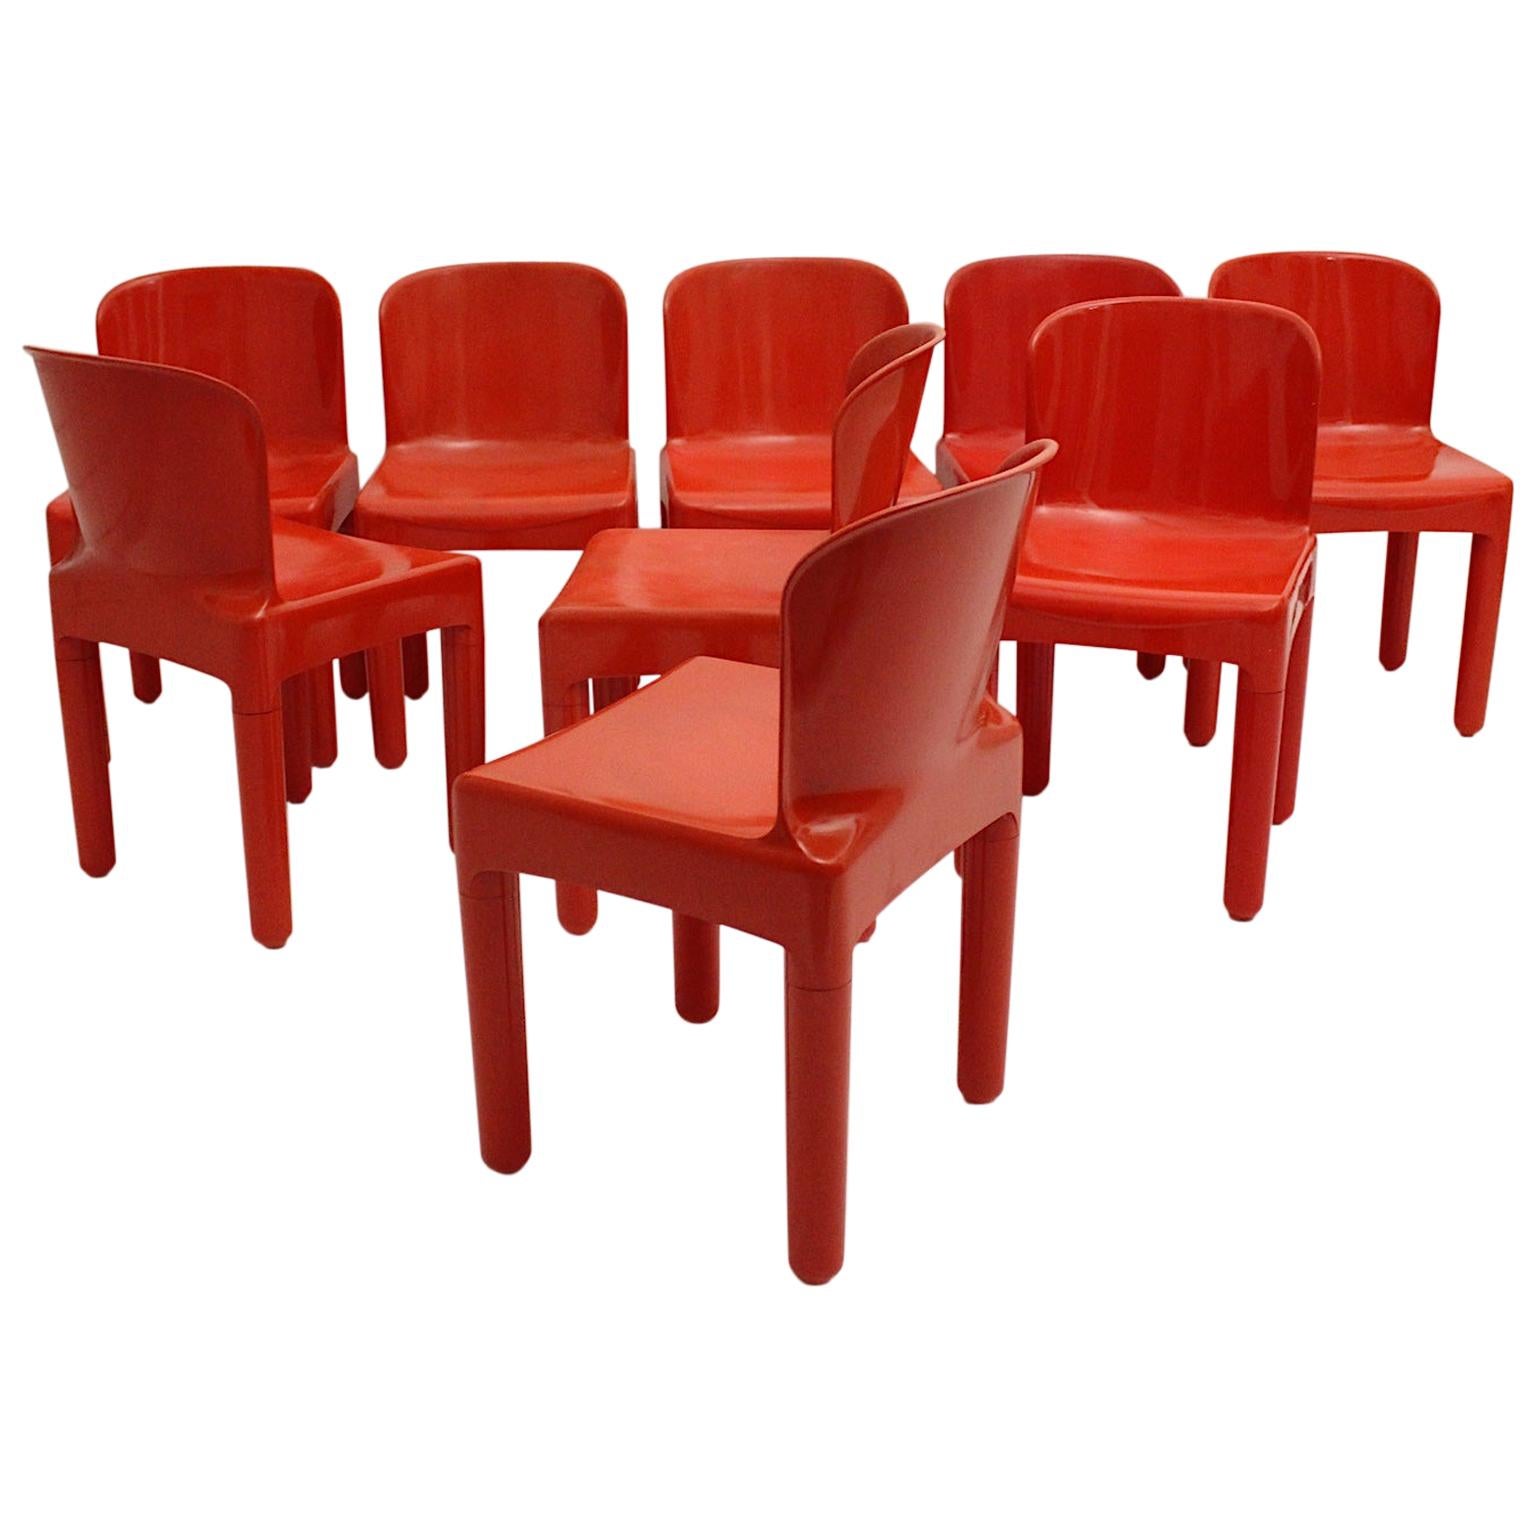 Space Age Vintage Eight Red Plastic Dining Chairs by Marcello Siard, Italy, 1969